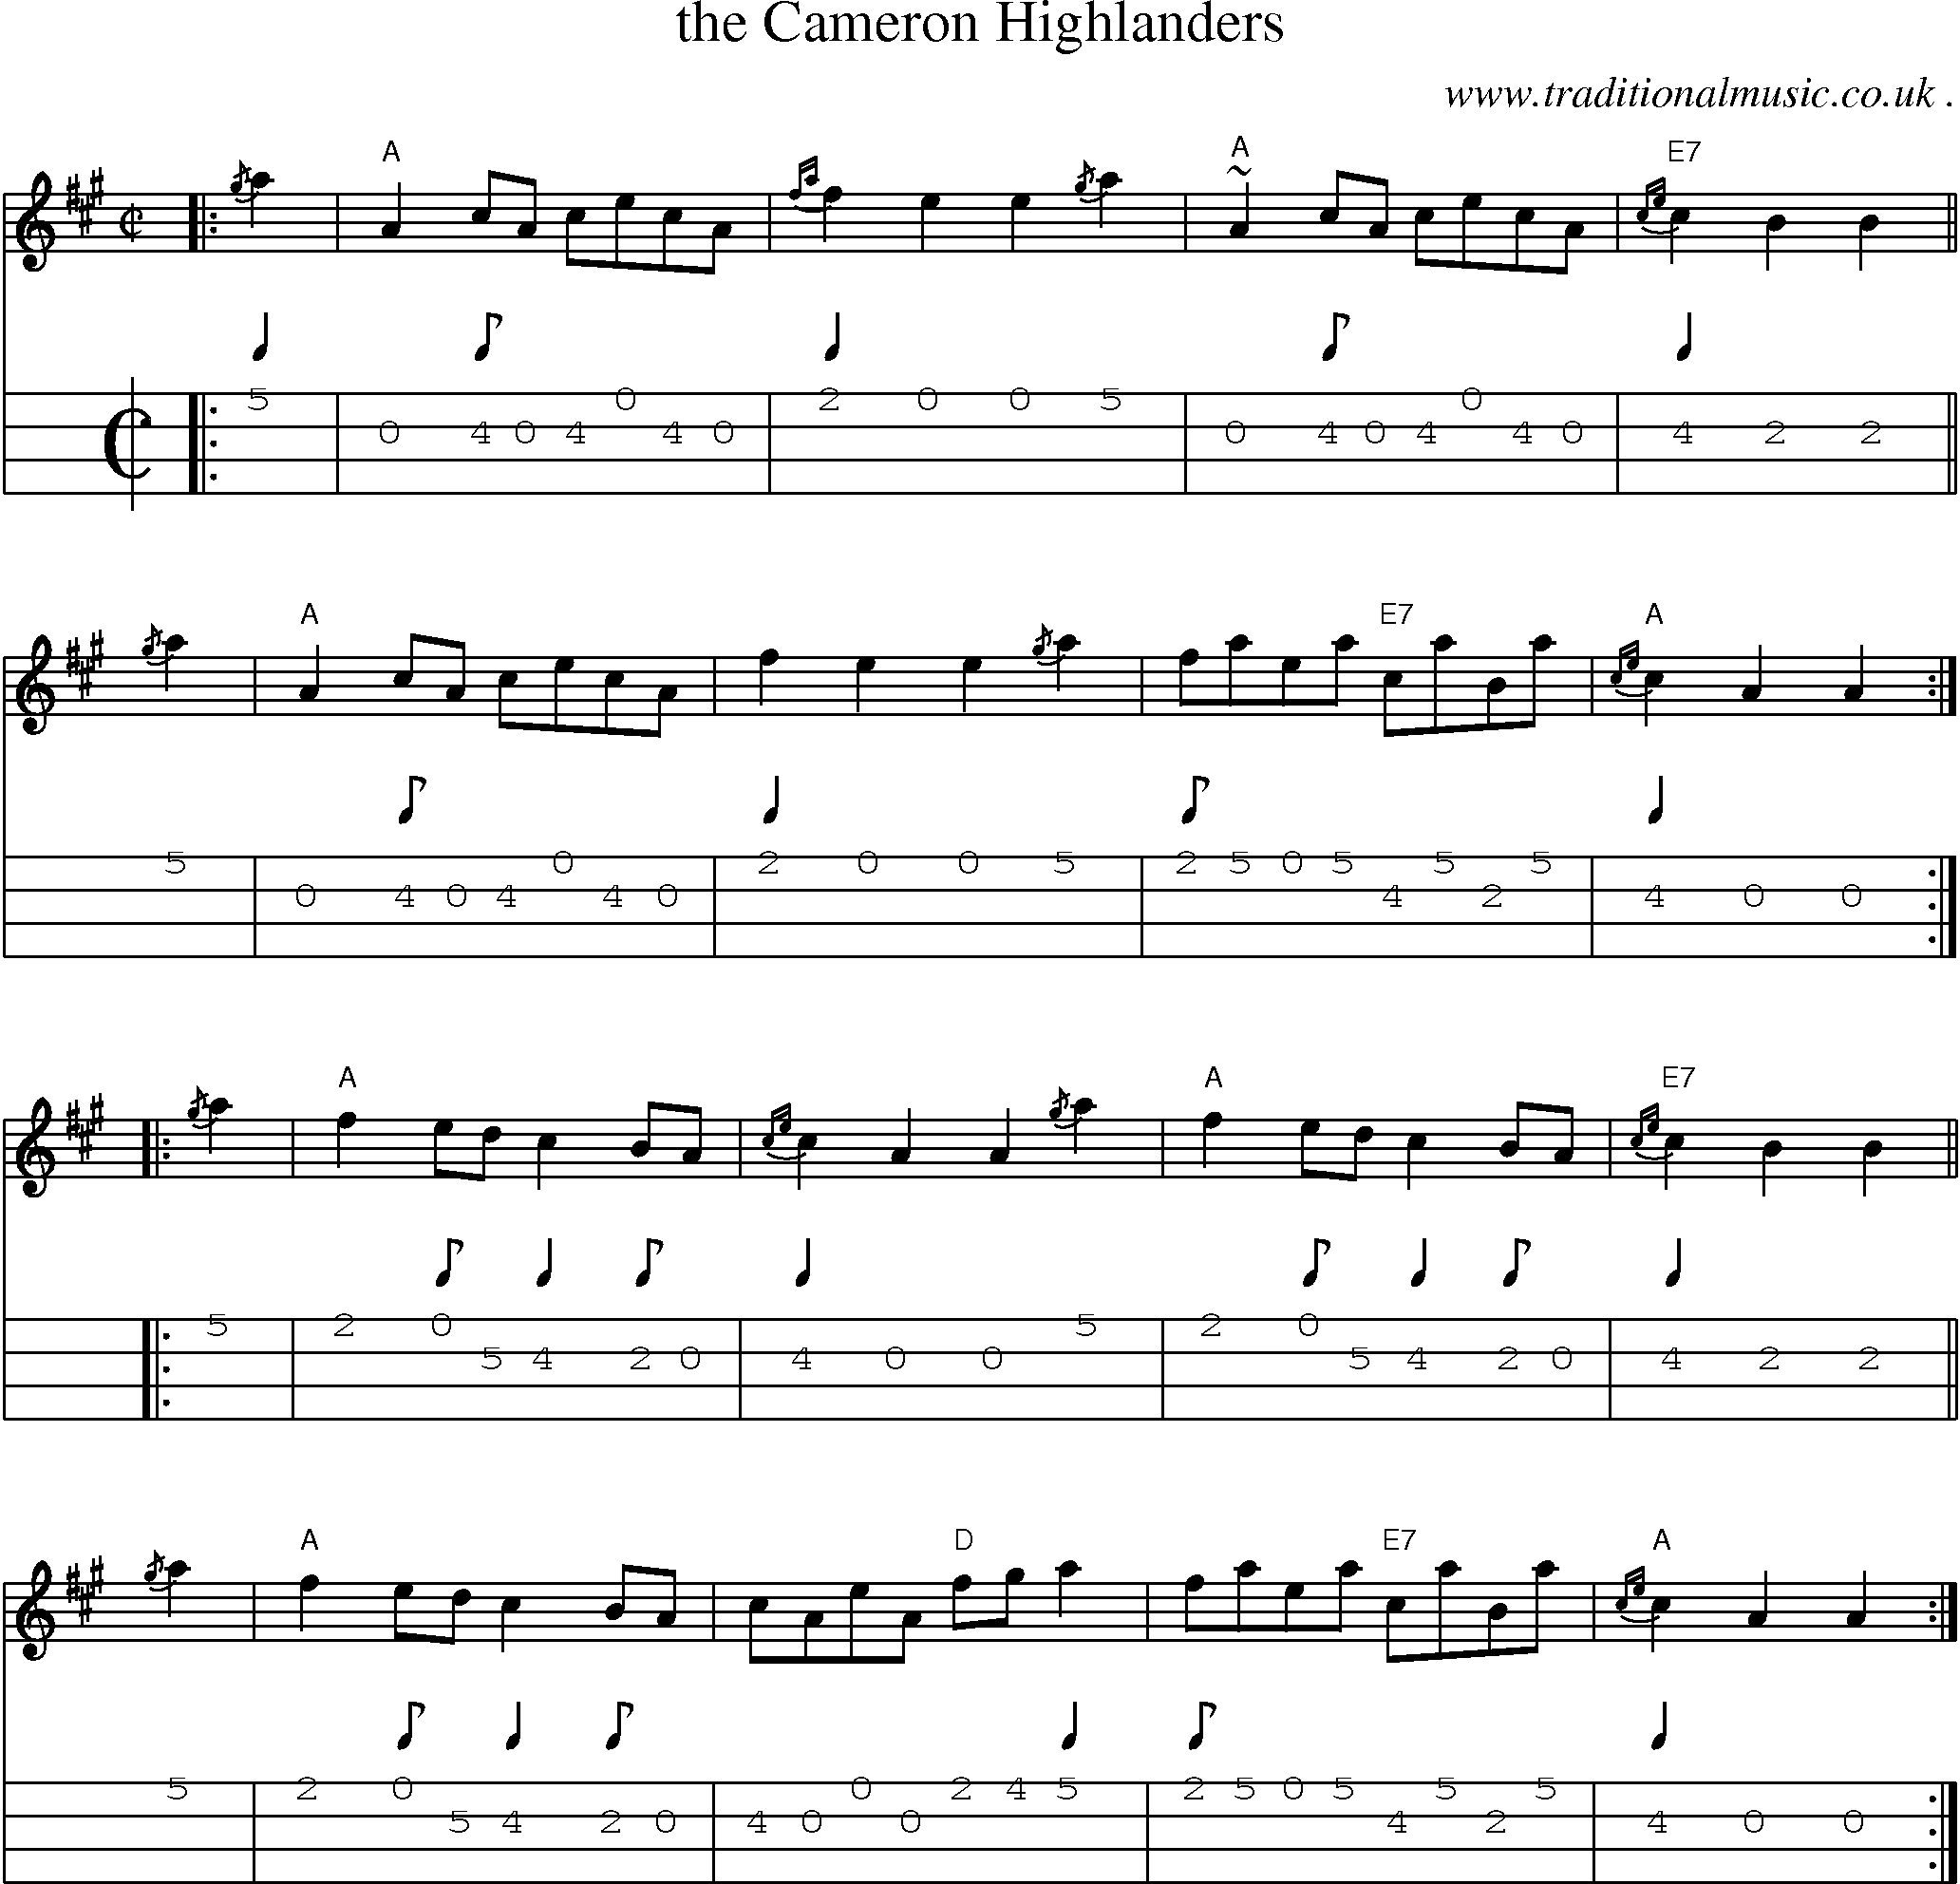 Sheet-music  score, Chords and Mandolin Tabs for The Cameron Highlanders